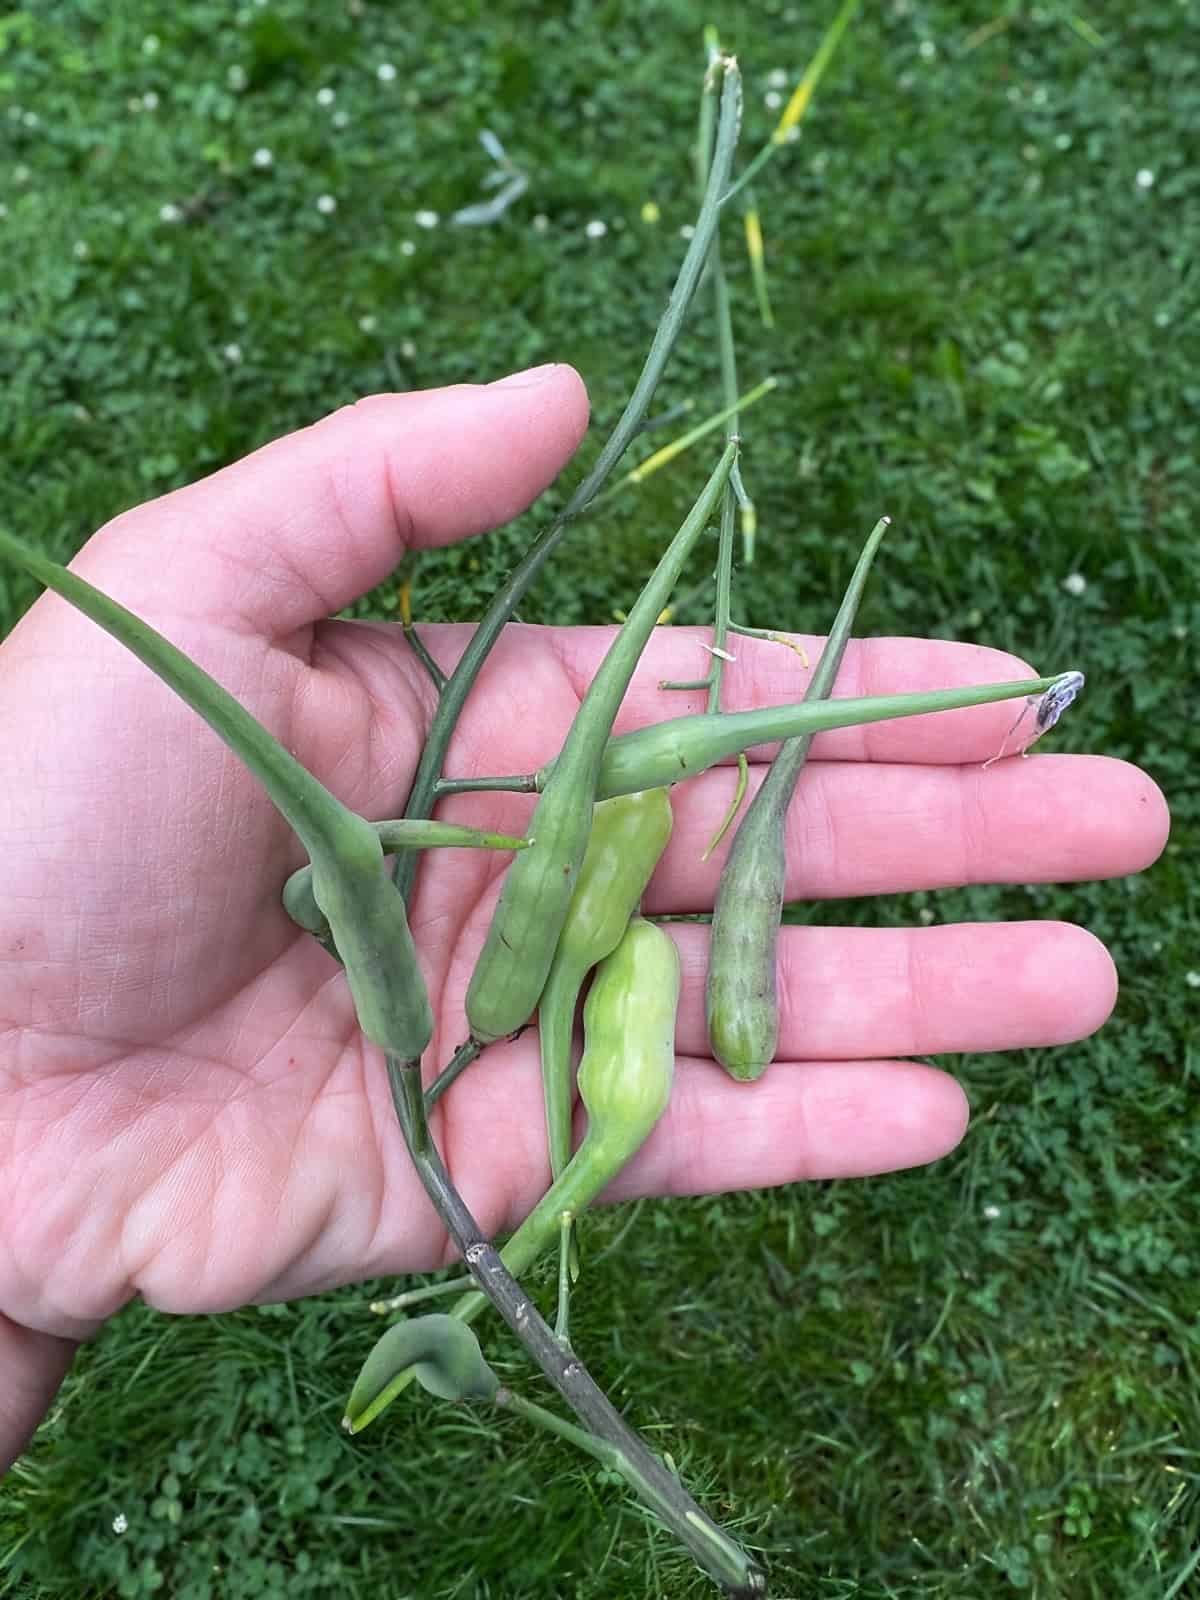 An image of a hand holding picked radish pods.